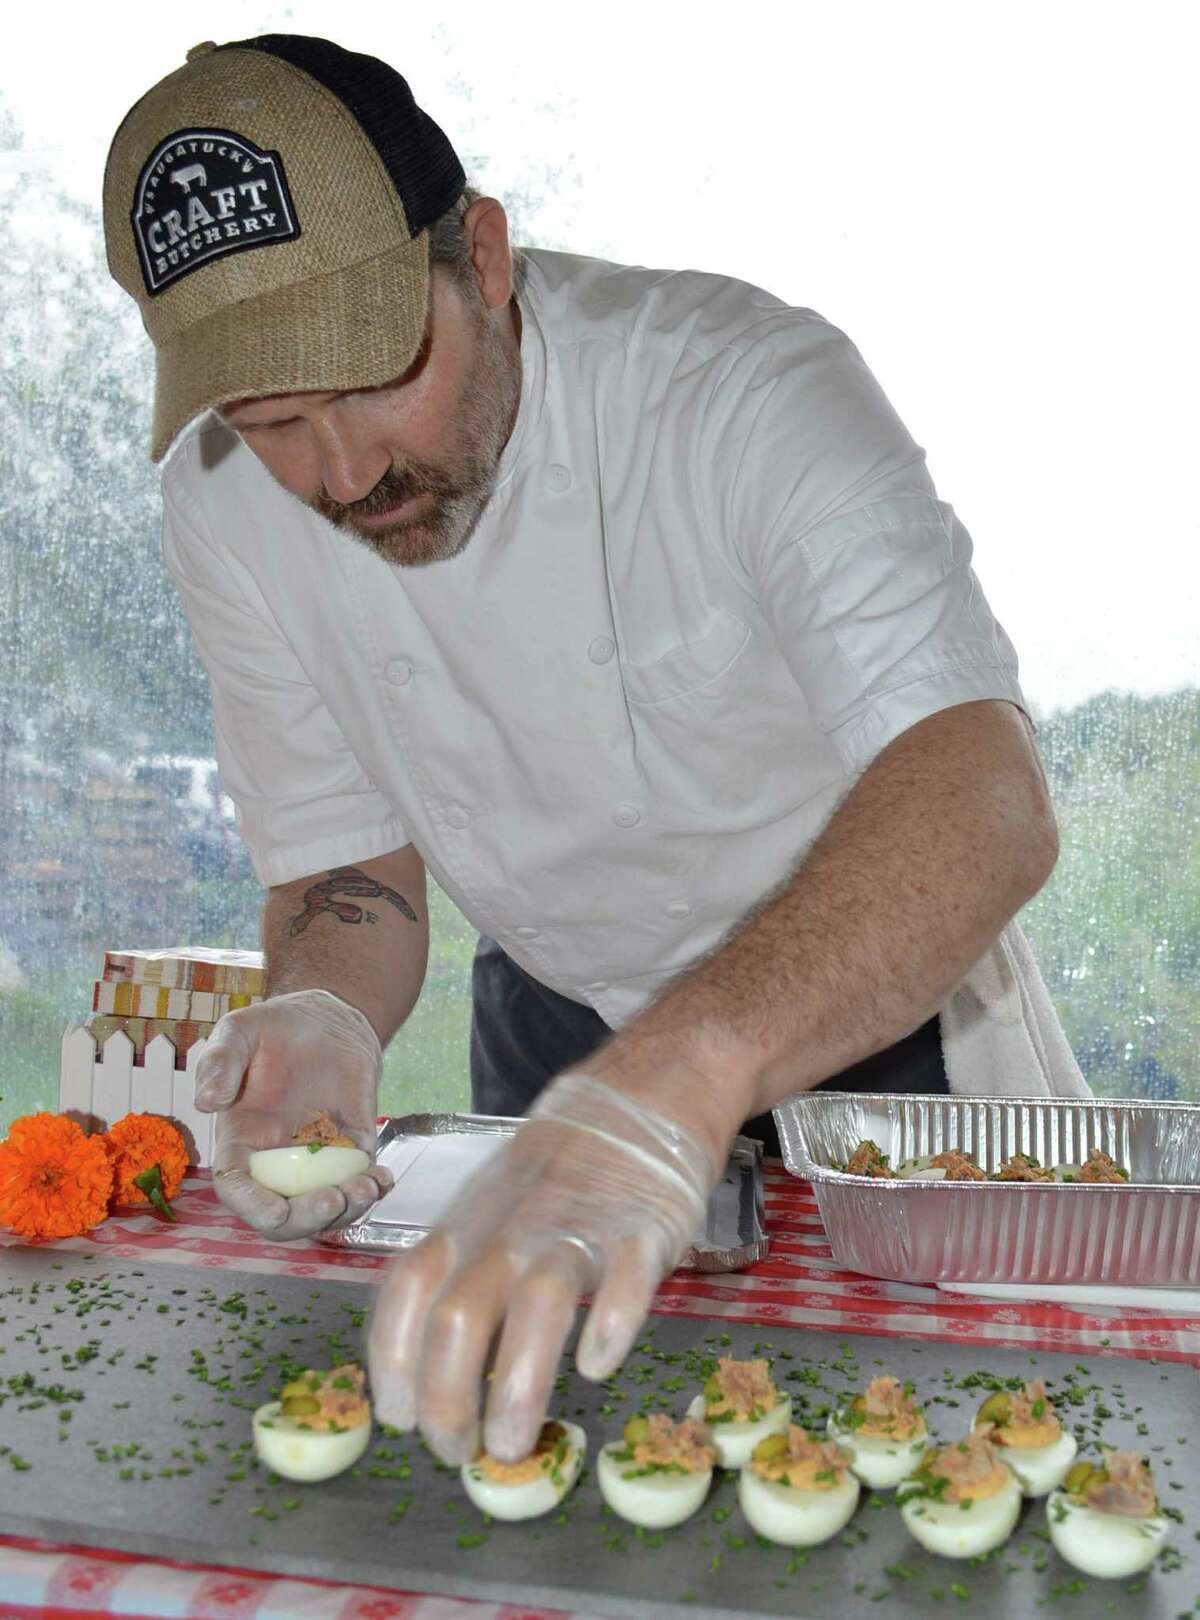 Mark Heppermann of the Saugatuck Craft Butchery prepares some appetizers for 225 guests at Harvest Fest.